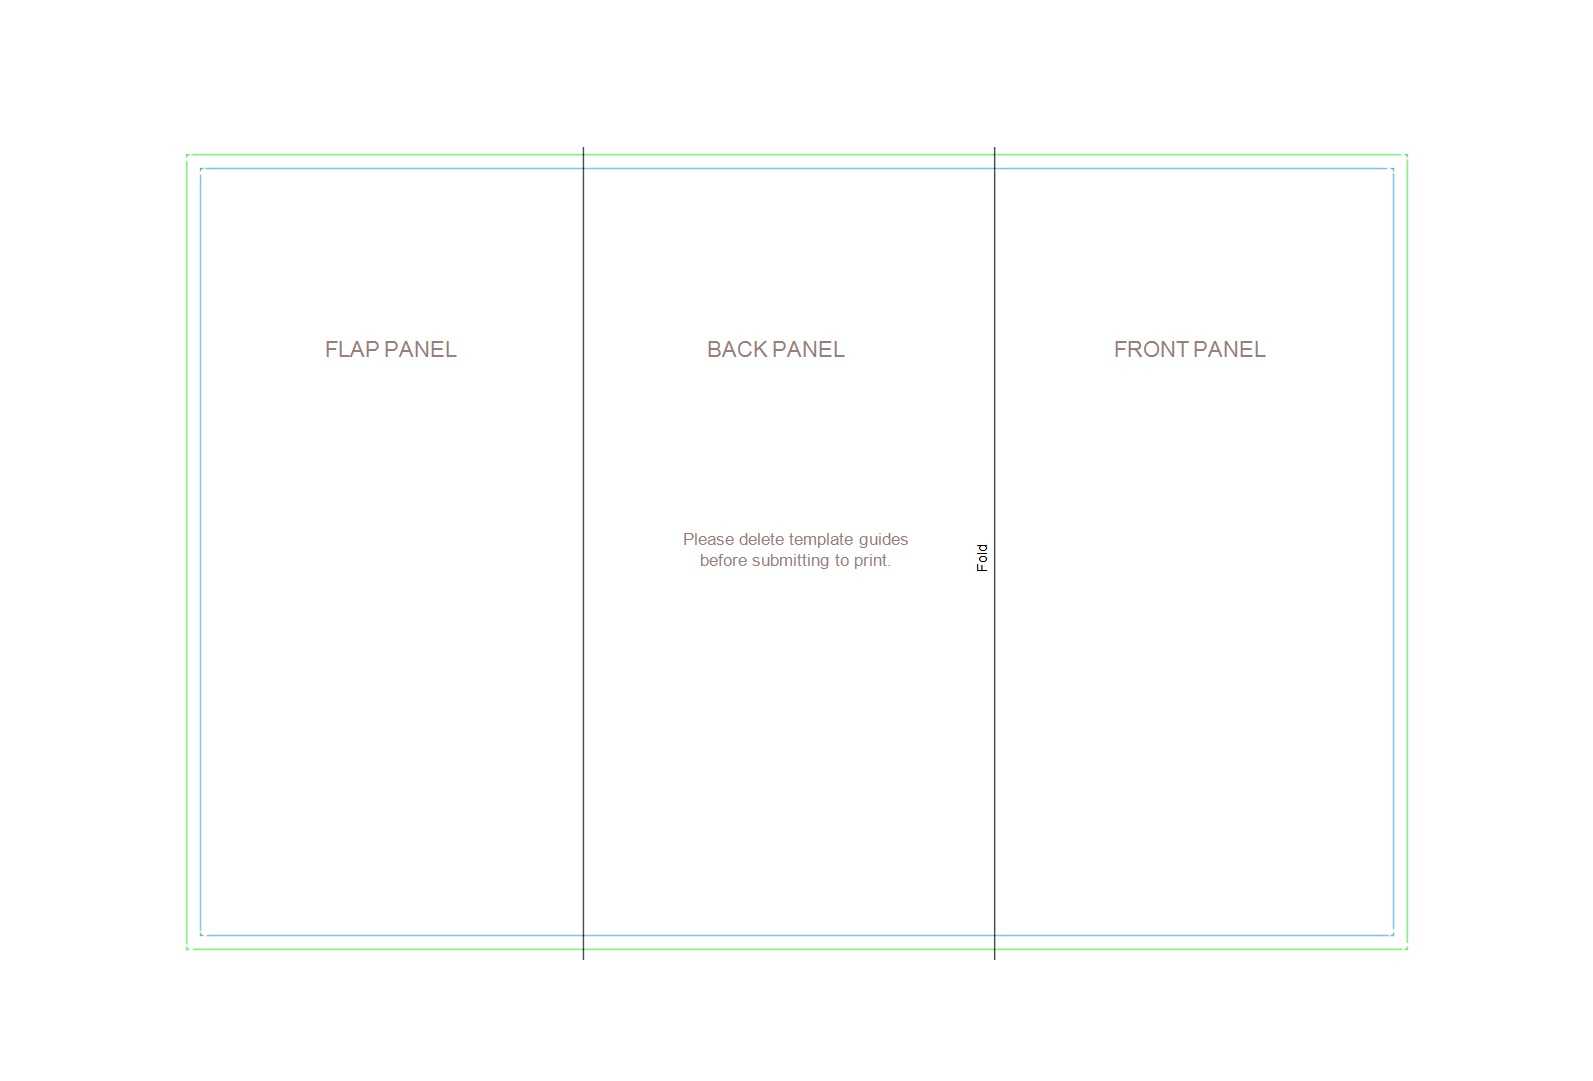 Pamphlet Template Docs - Dalep.midnightpig.co With Regard To Brochure Templates Google Drive